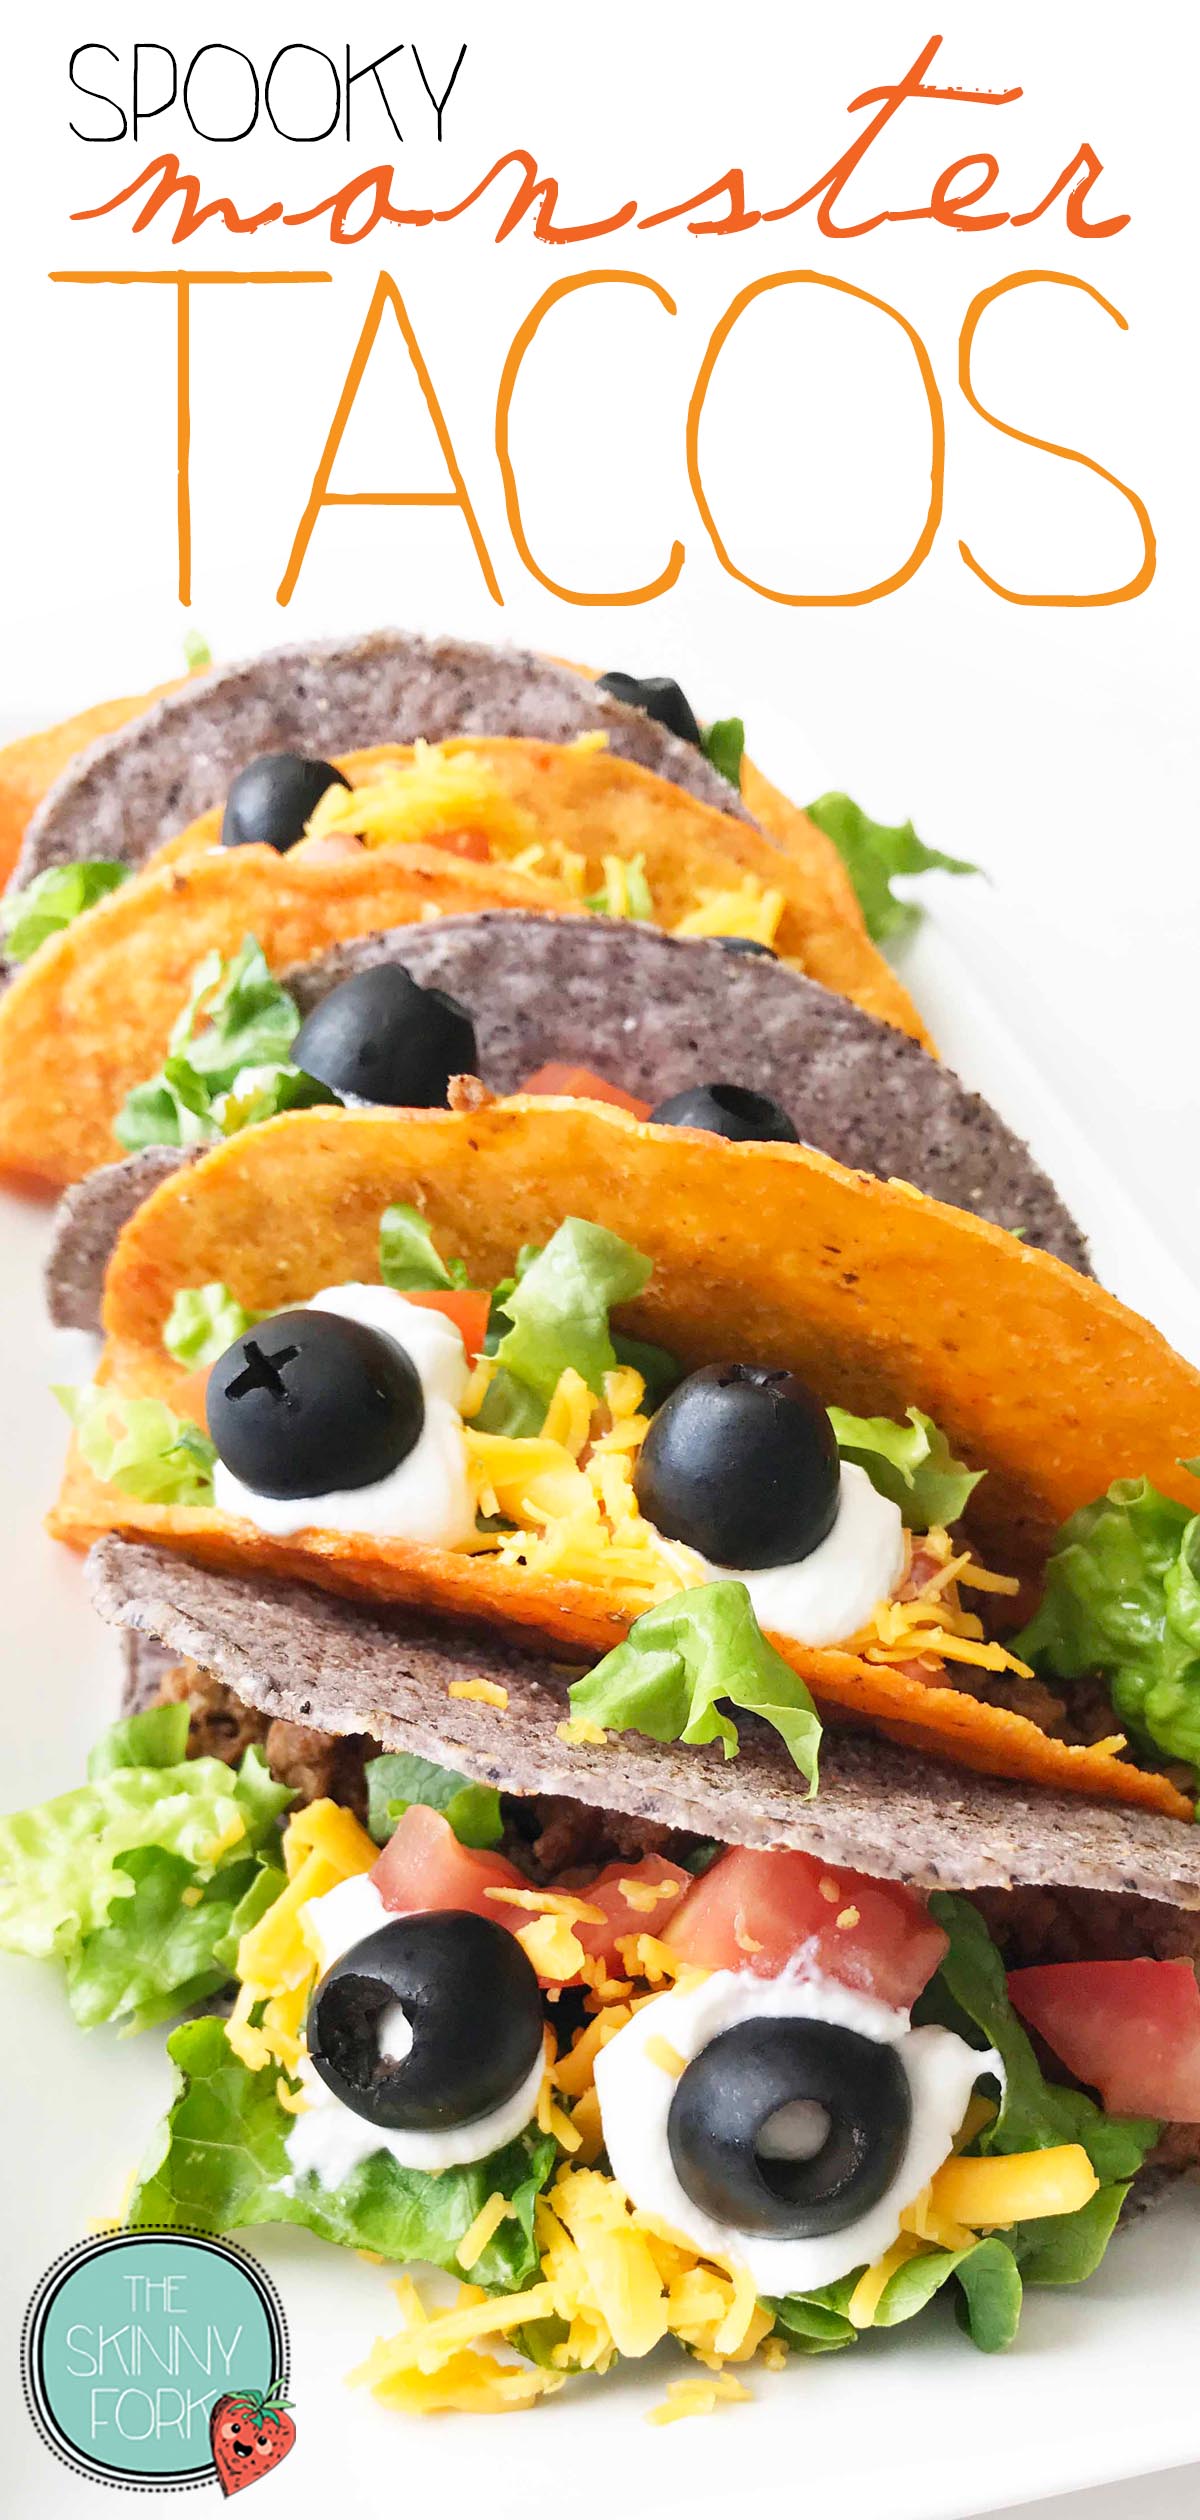 Spooky 'Monster' Tacos